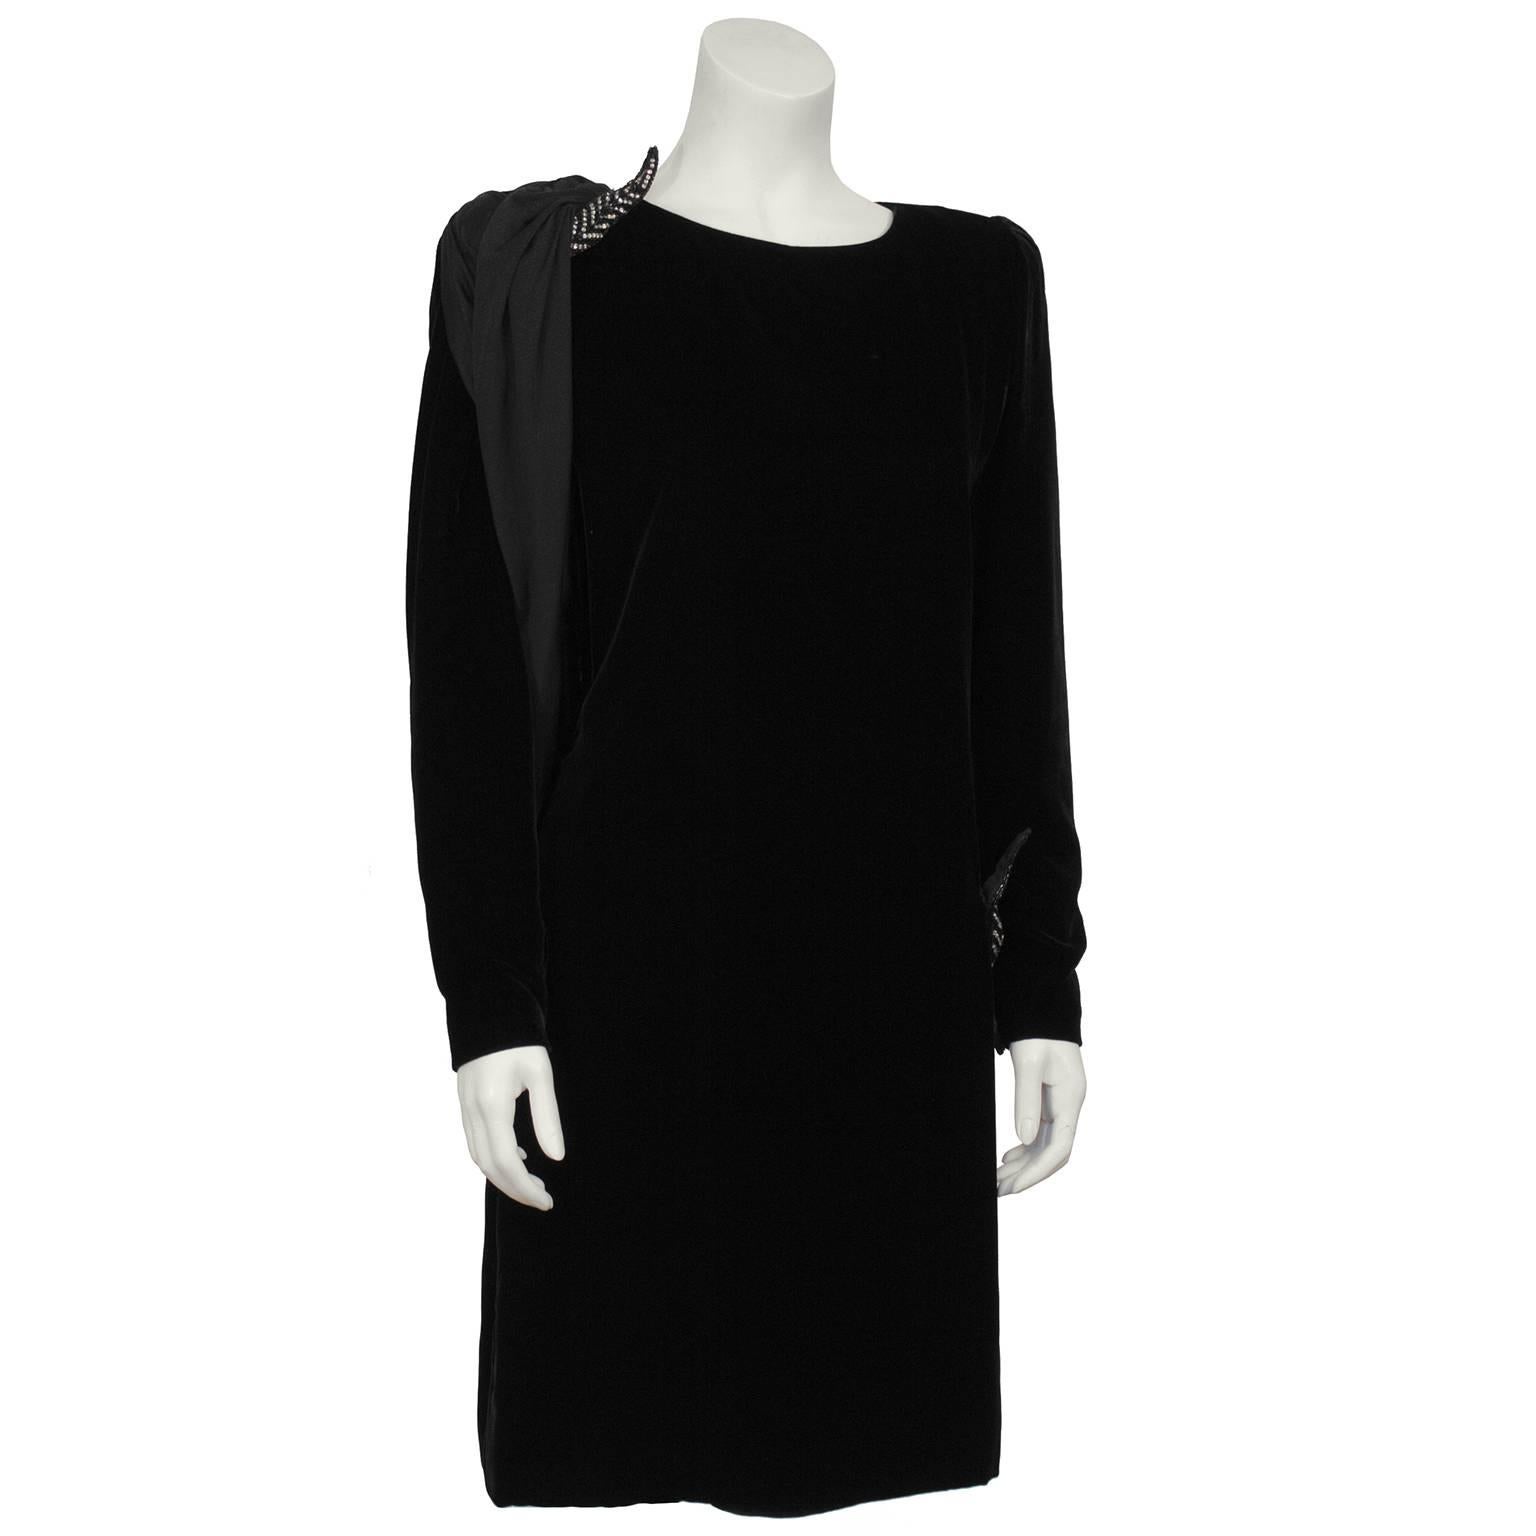 Long sleeve black velvet Valentino cocktail dress from the 1980's with a jersey sash detail. The dress has a boat style neckline, slight puffed shoulders and tapered sleeves with zippers at the wrists. The black jersey sash starts at the front of